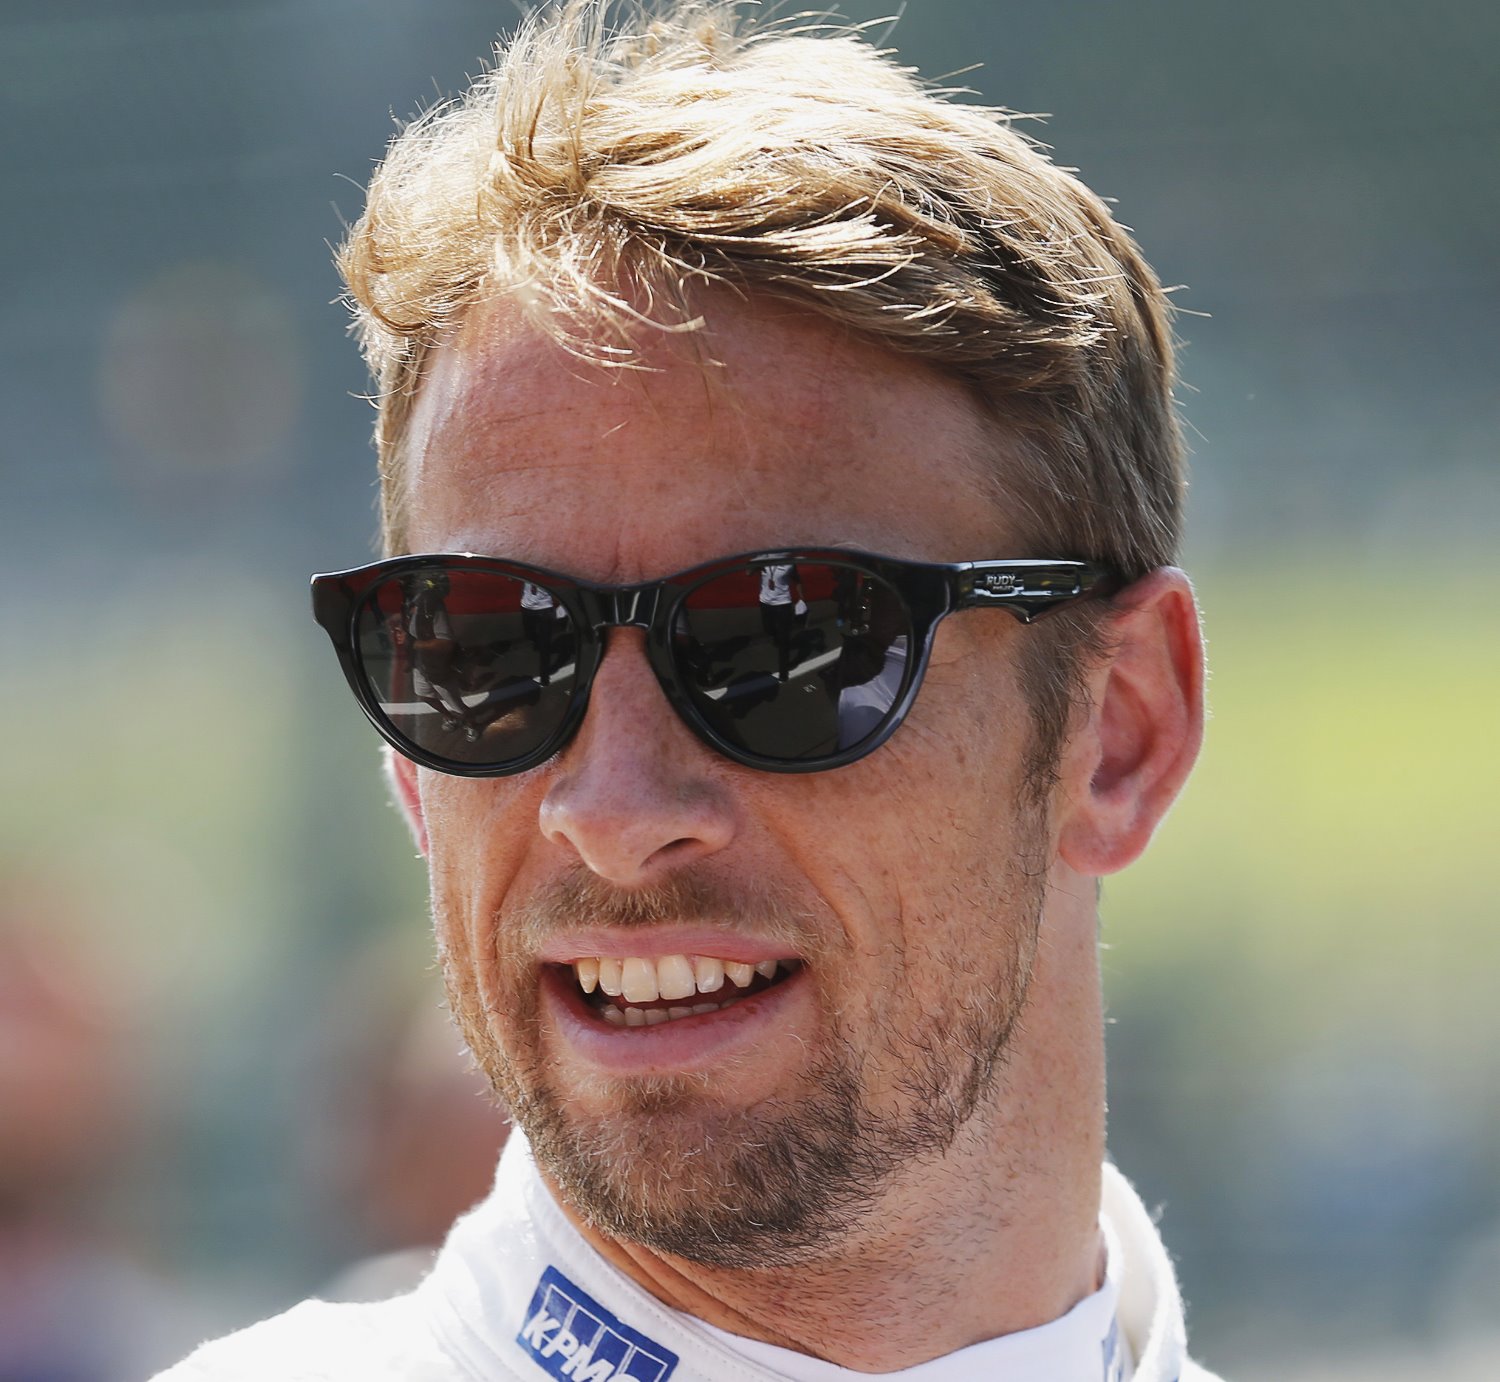 Jenson Button could be out